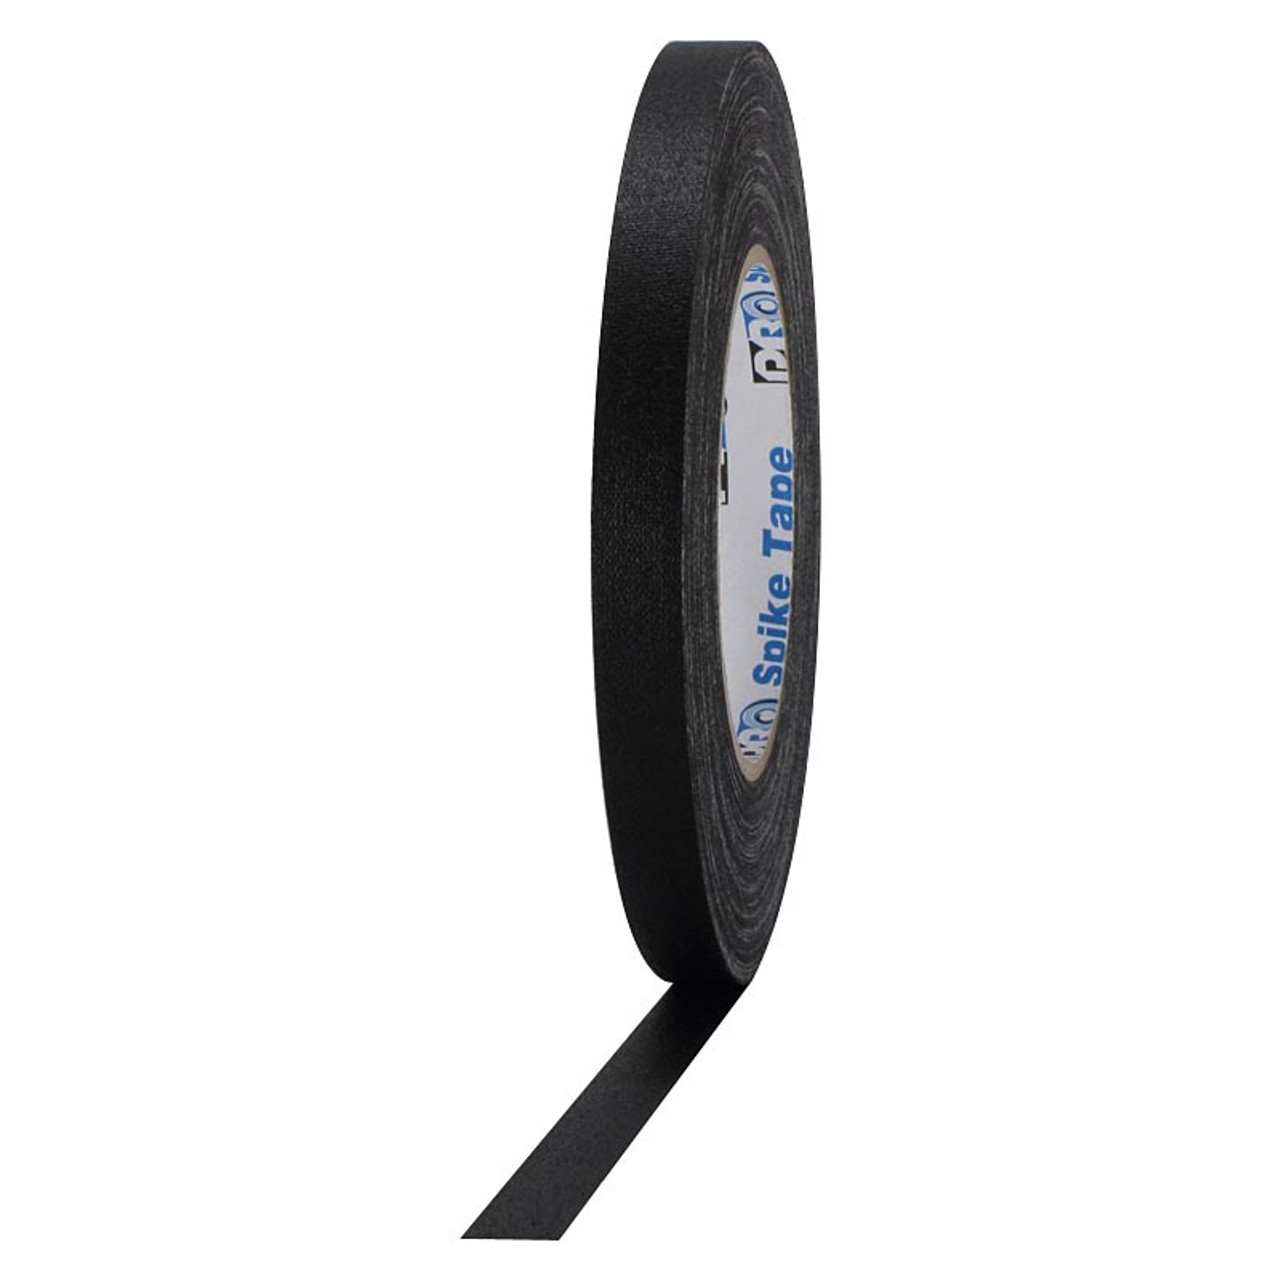 ProGaff 1/2 Cloth Spike tape – Voice and Video Sales